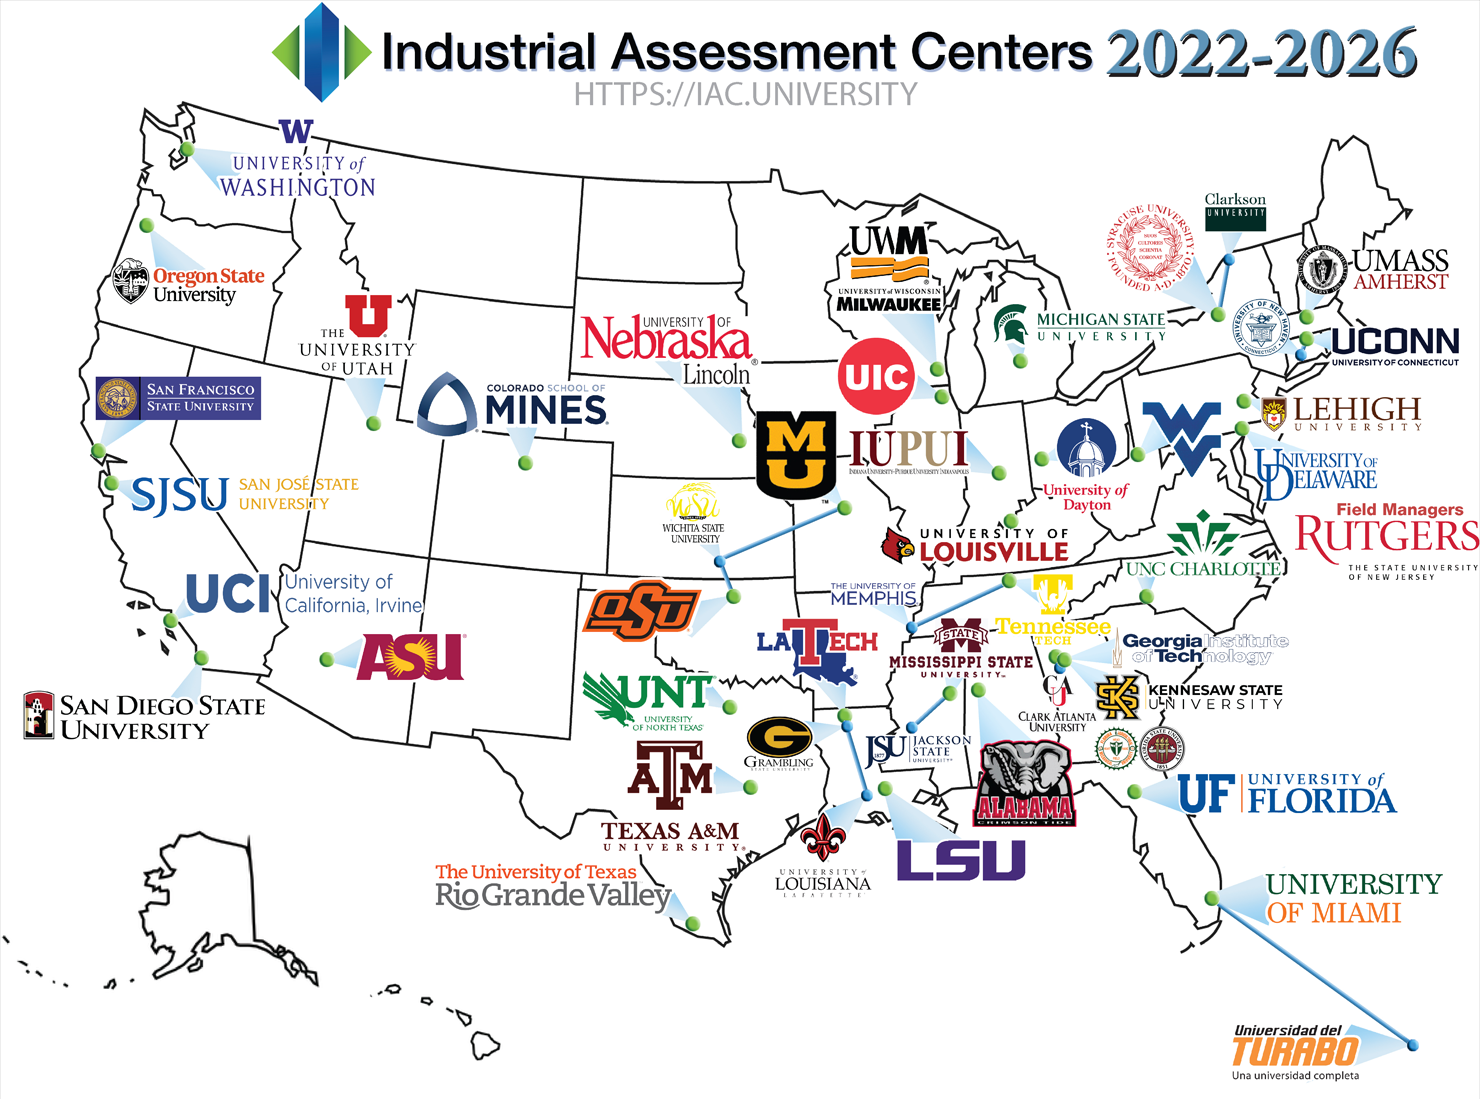 Industrial Assessment Centers, 2022-2026